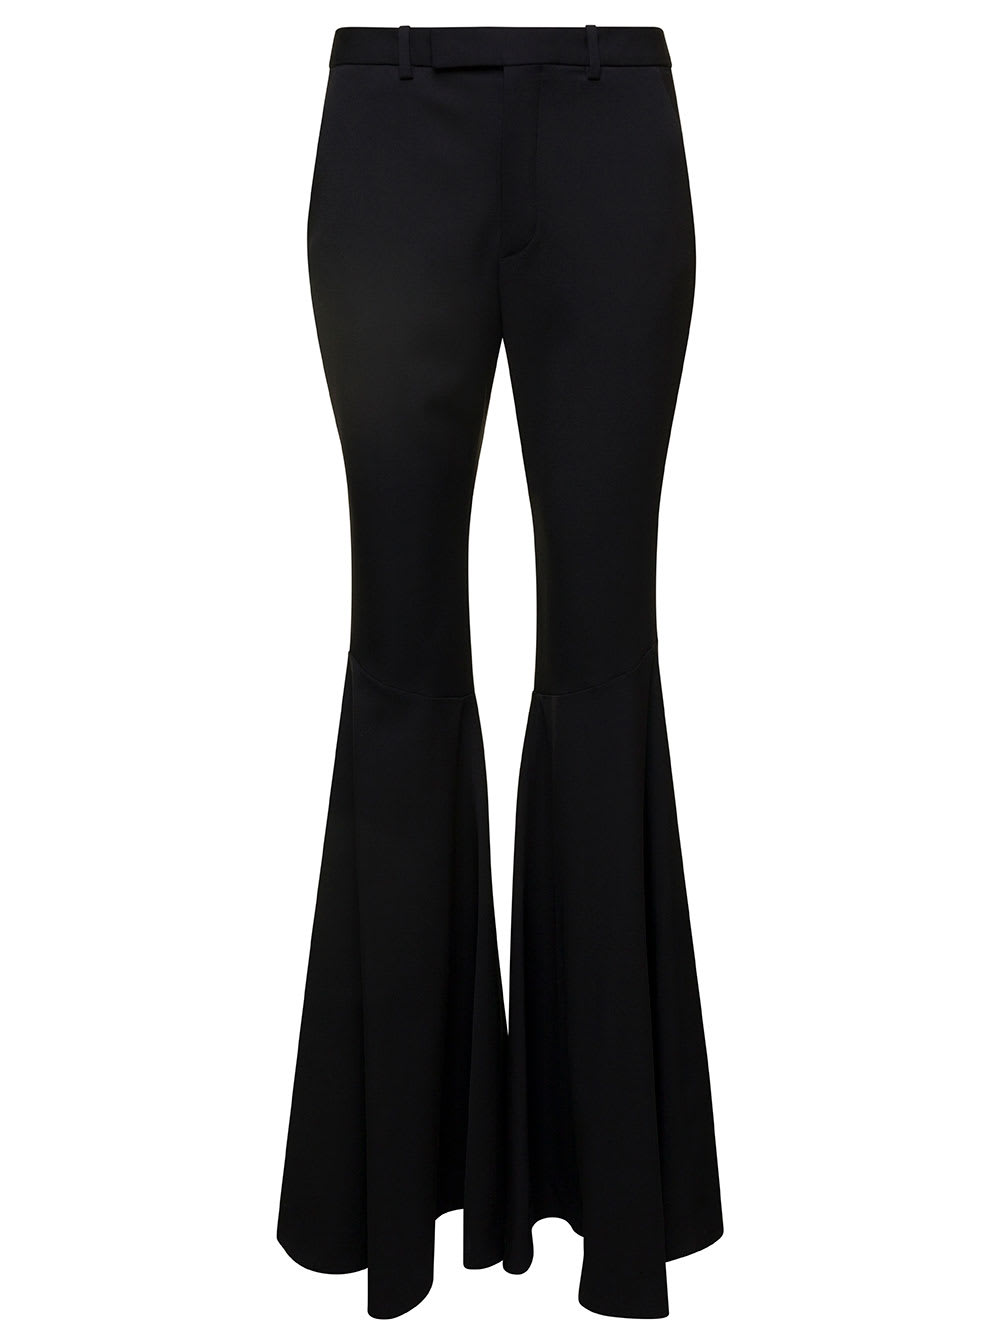 SAINT LAURENT BLACK HIGH-WAISTED FLARED TROUSERS IN COTTON WOMAN